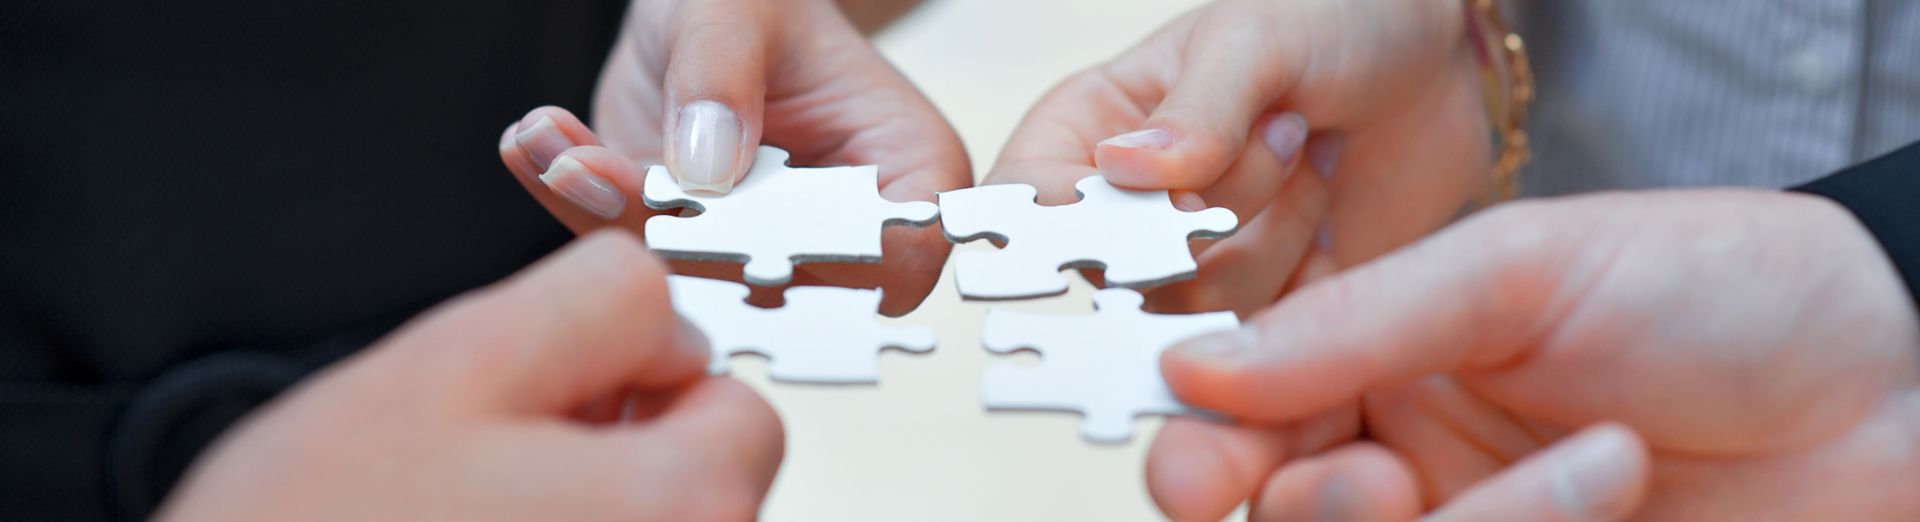 Connecting puzzle pieces represents value of integration - seeing the big picture